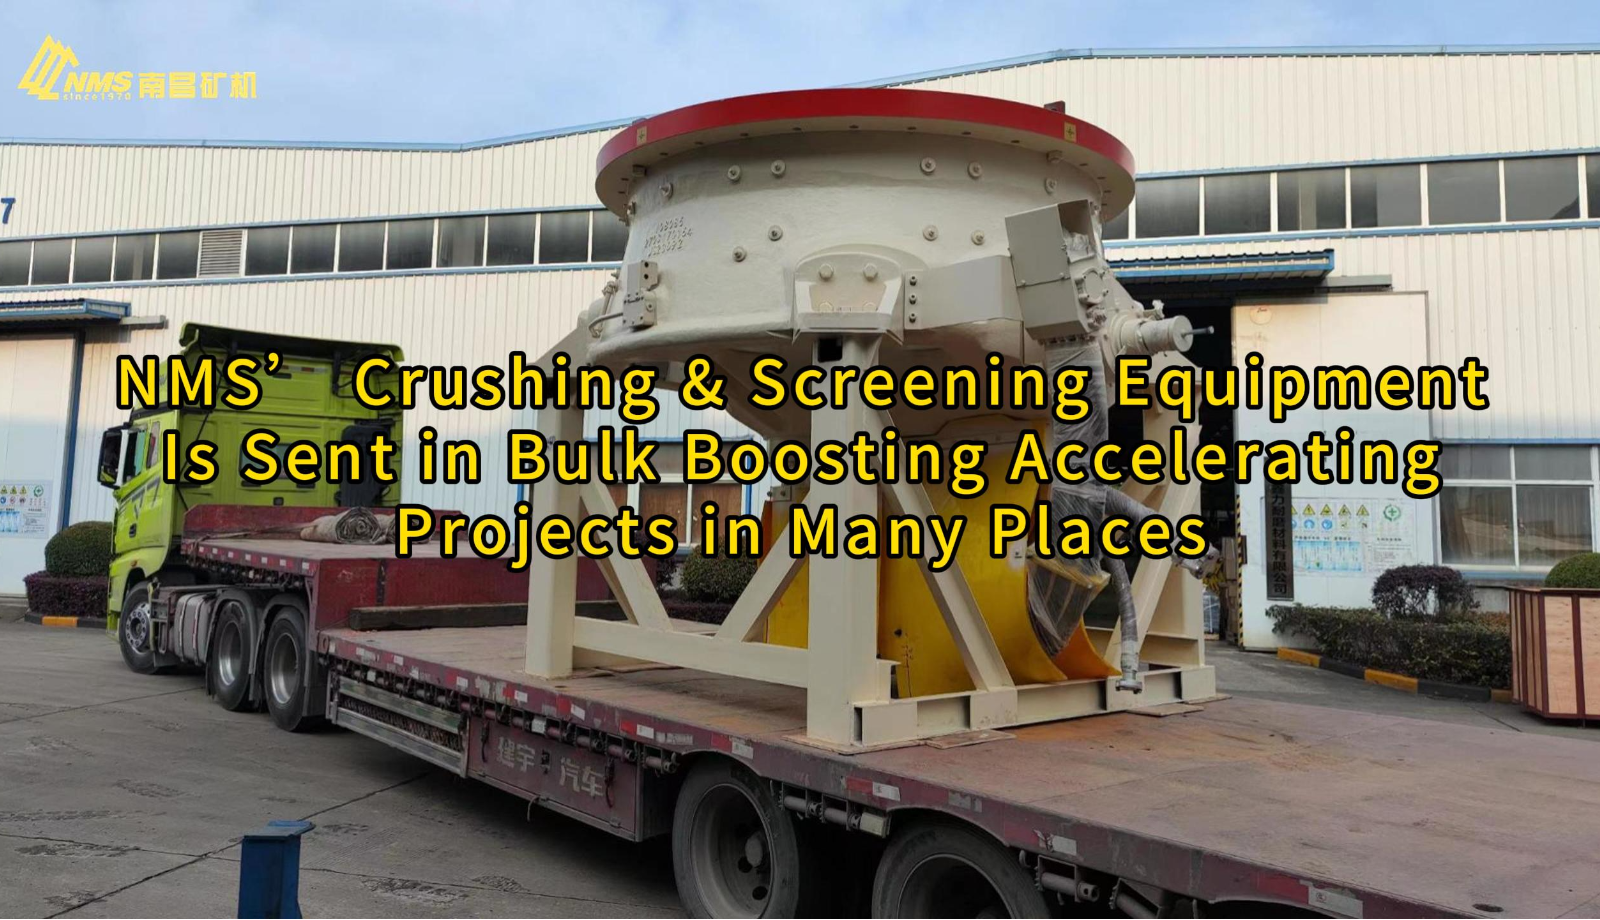 NMS’ Crushing & Screening Equipment Is Sent in Bulk Boosting Accelerating Projects in Many Places